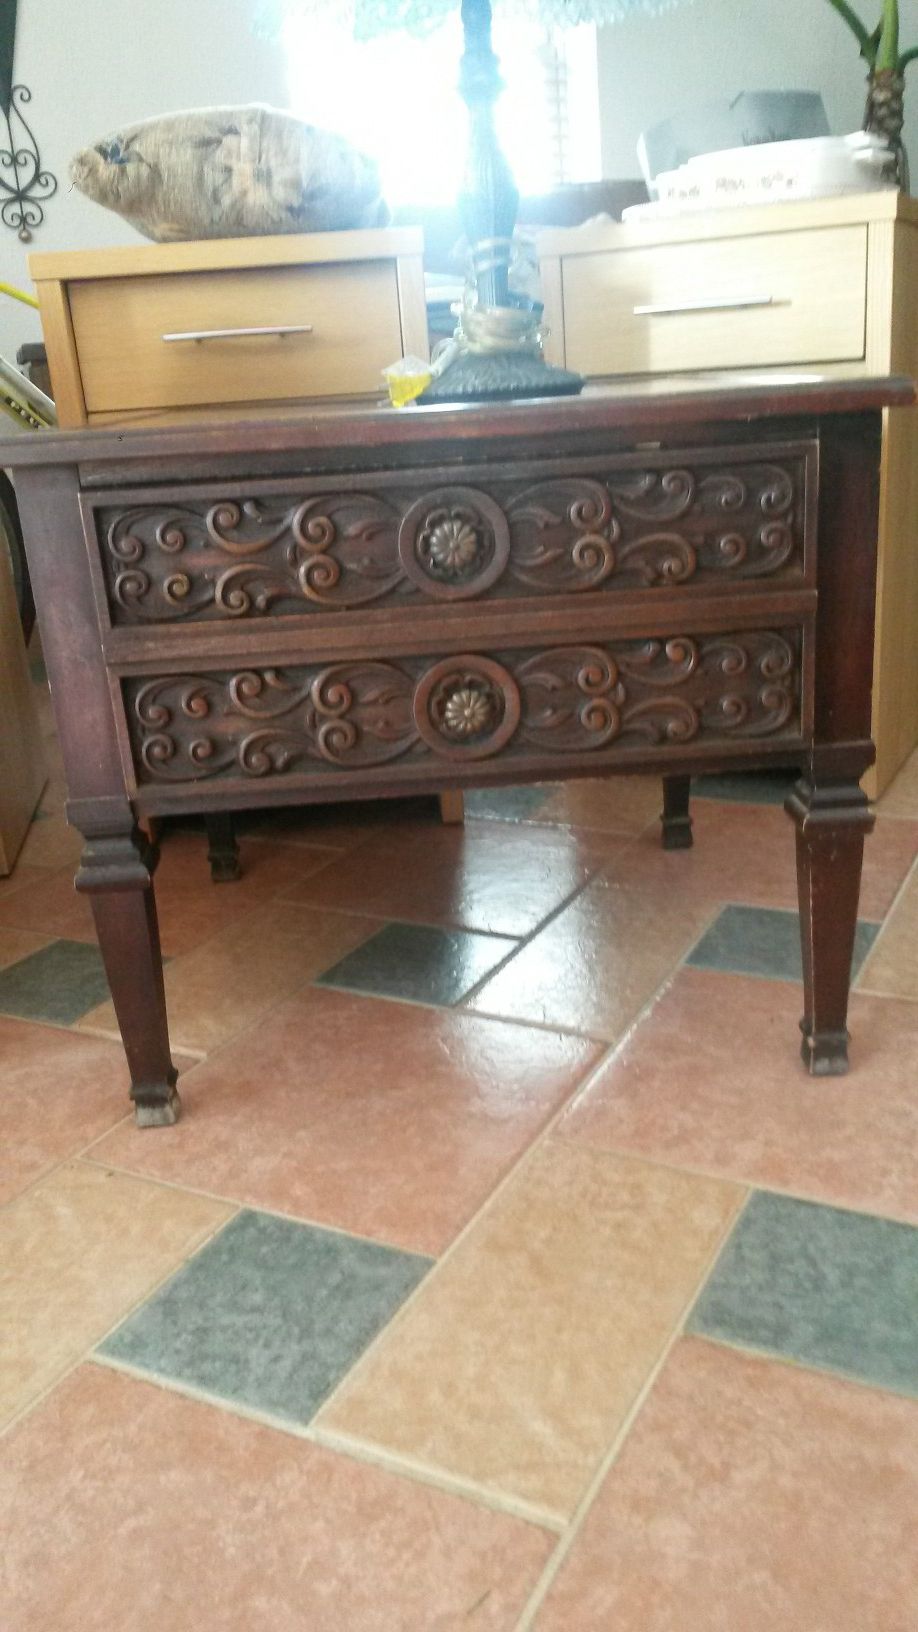 Gorgeous solid cherry wood antique end table